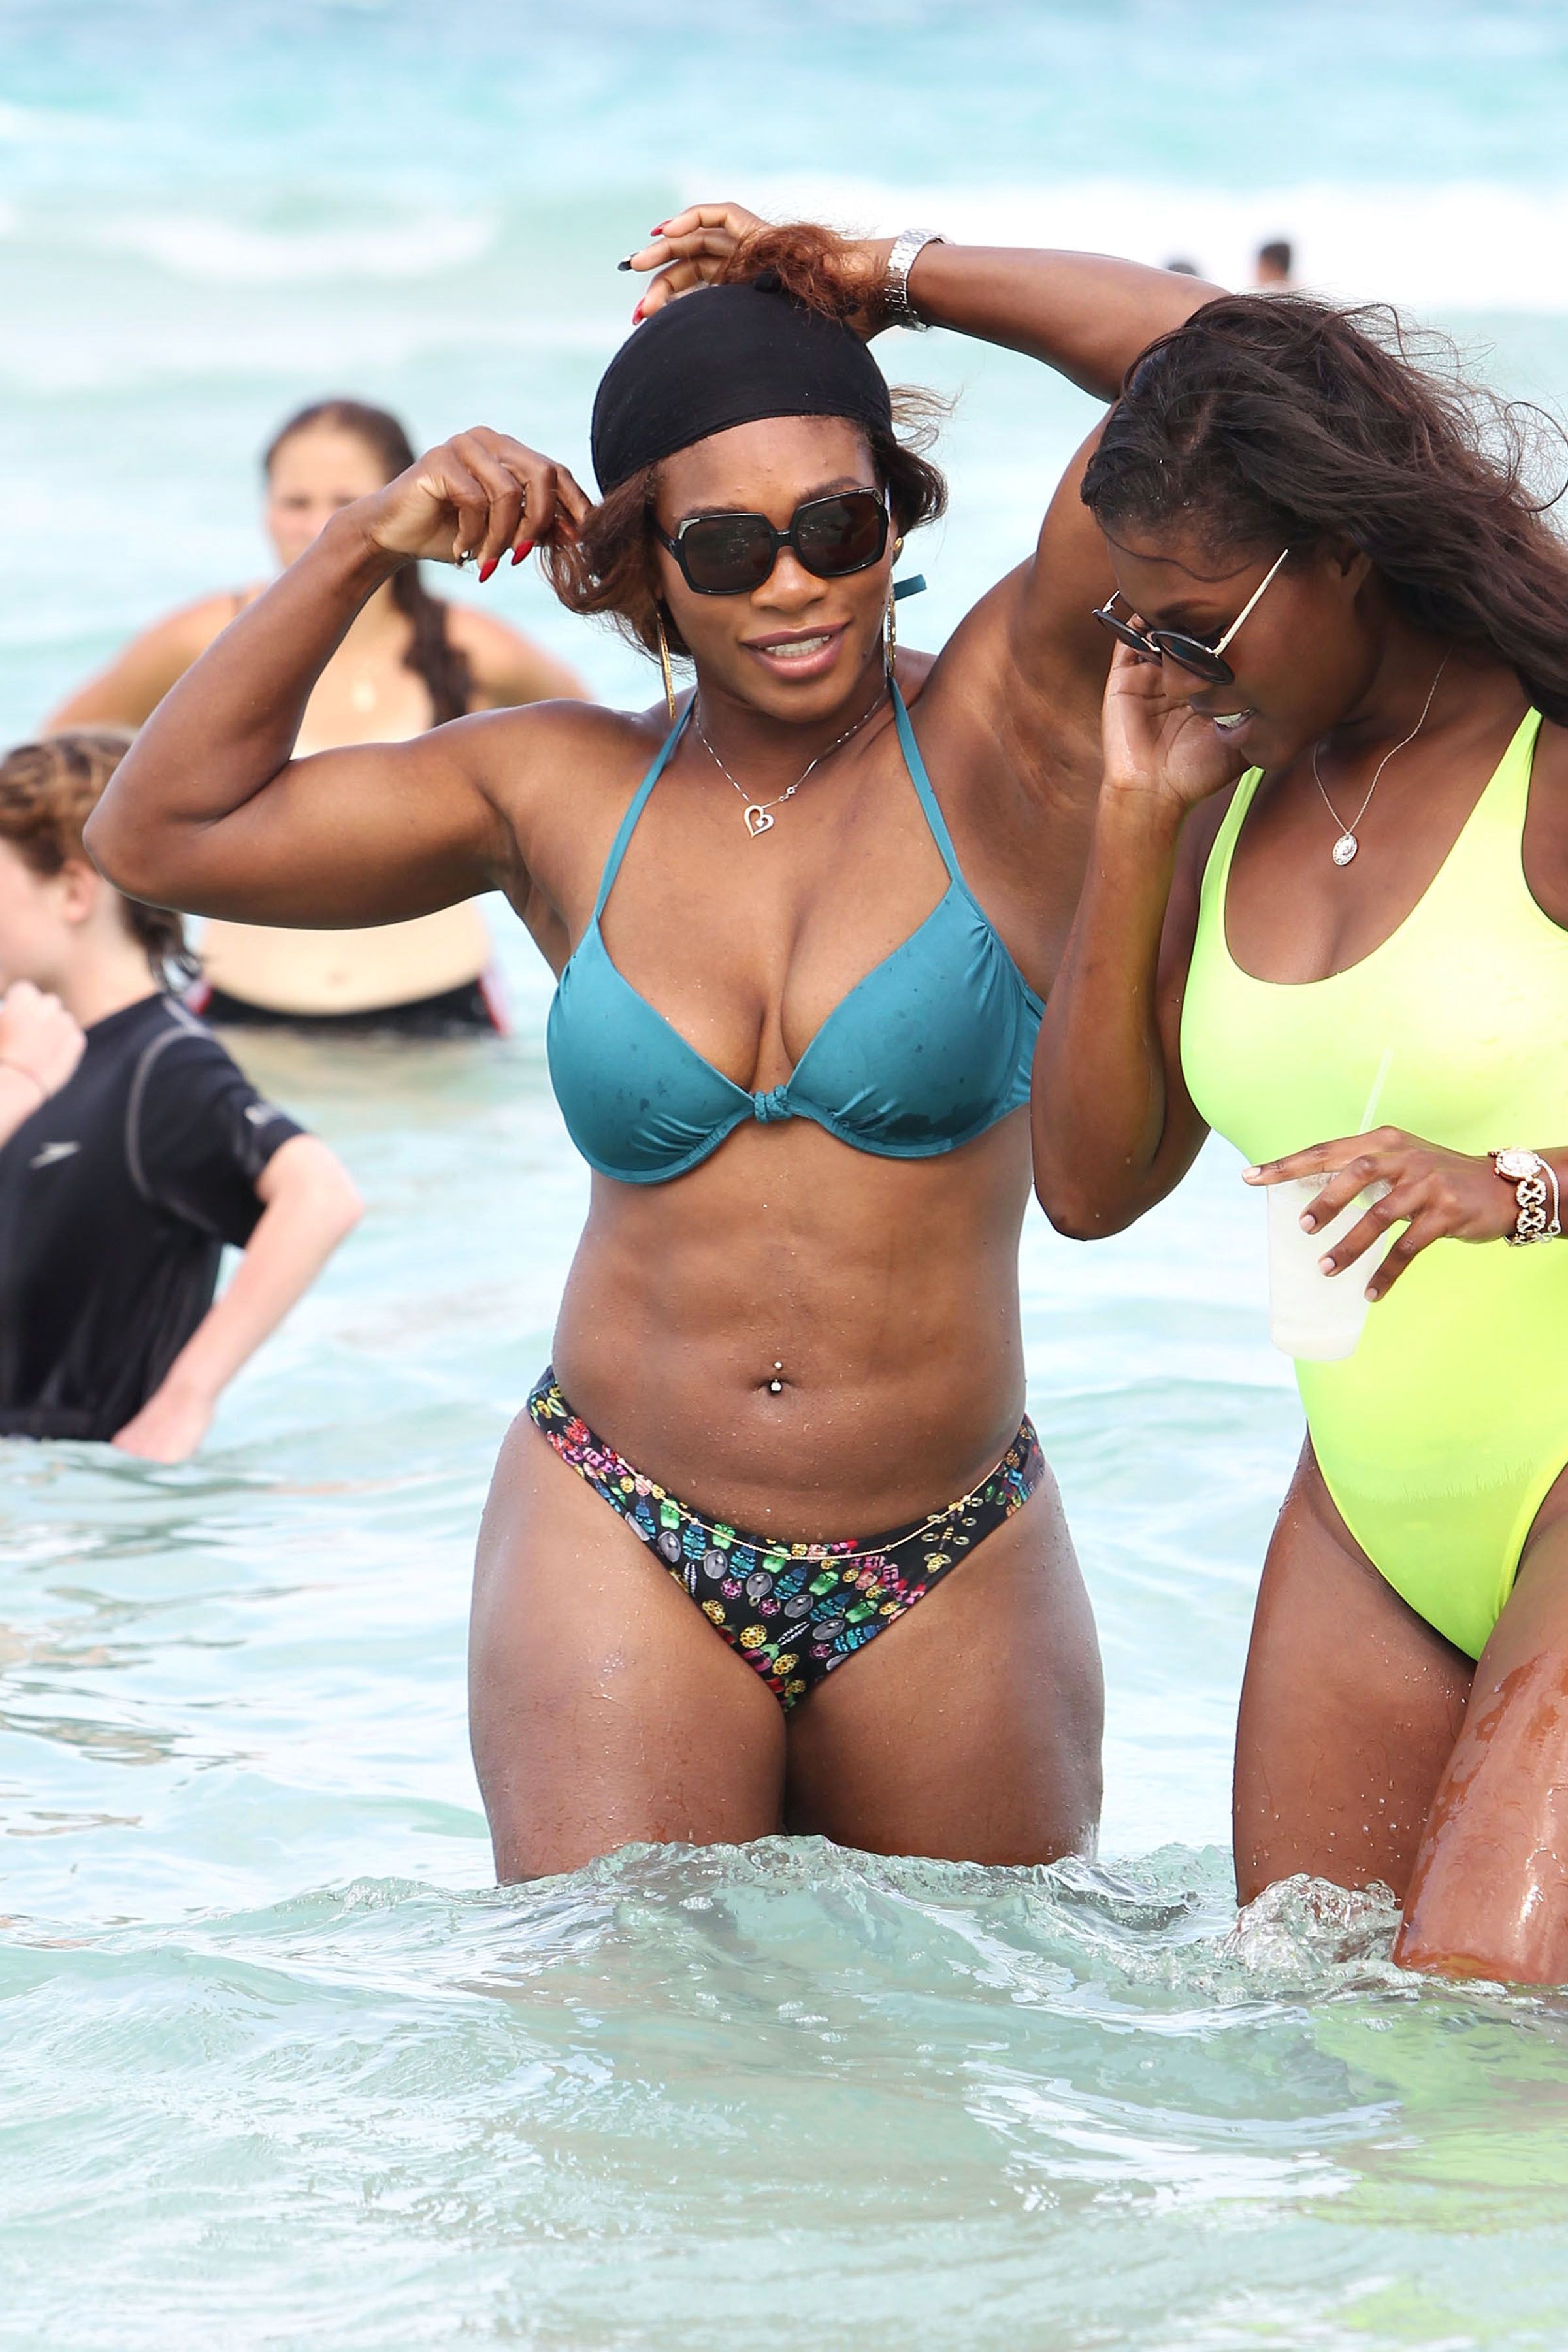 116791, Serena Williams shows off her fit body as she takes a dip in the ocean with a friend on Miami Beach. Miami, Florida - Wednesday April 16, 2014. Photograph: Brett Kaffee/Thibault Monnier, © PacificCoastNews. Los Angeles Office: +1 310.822.0419 London Office: +44 208.090.4079 sales@pacificcoastnews.com FEE MUST BE AGREED PRIOR TO USAGE